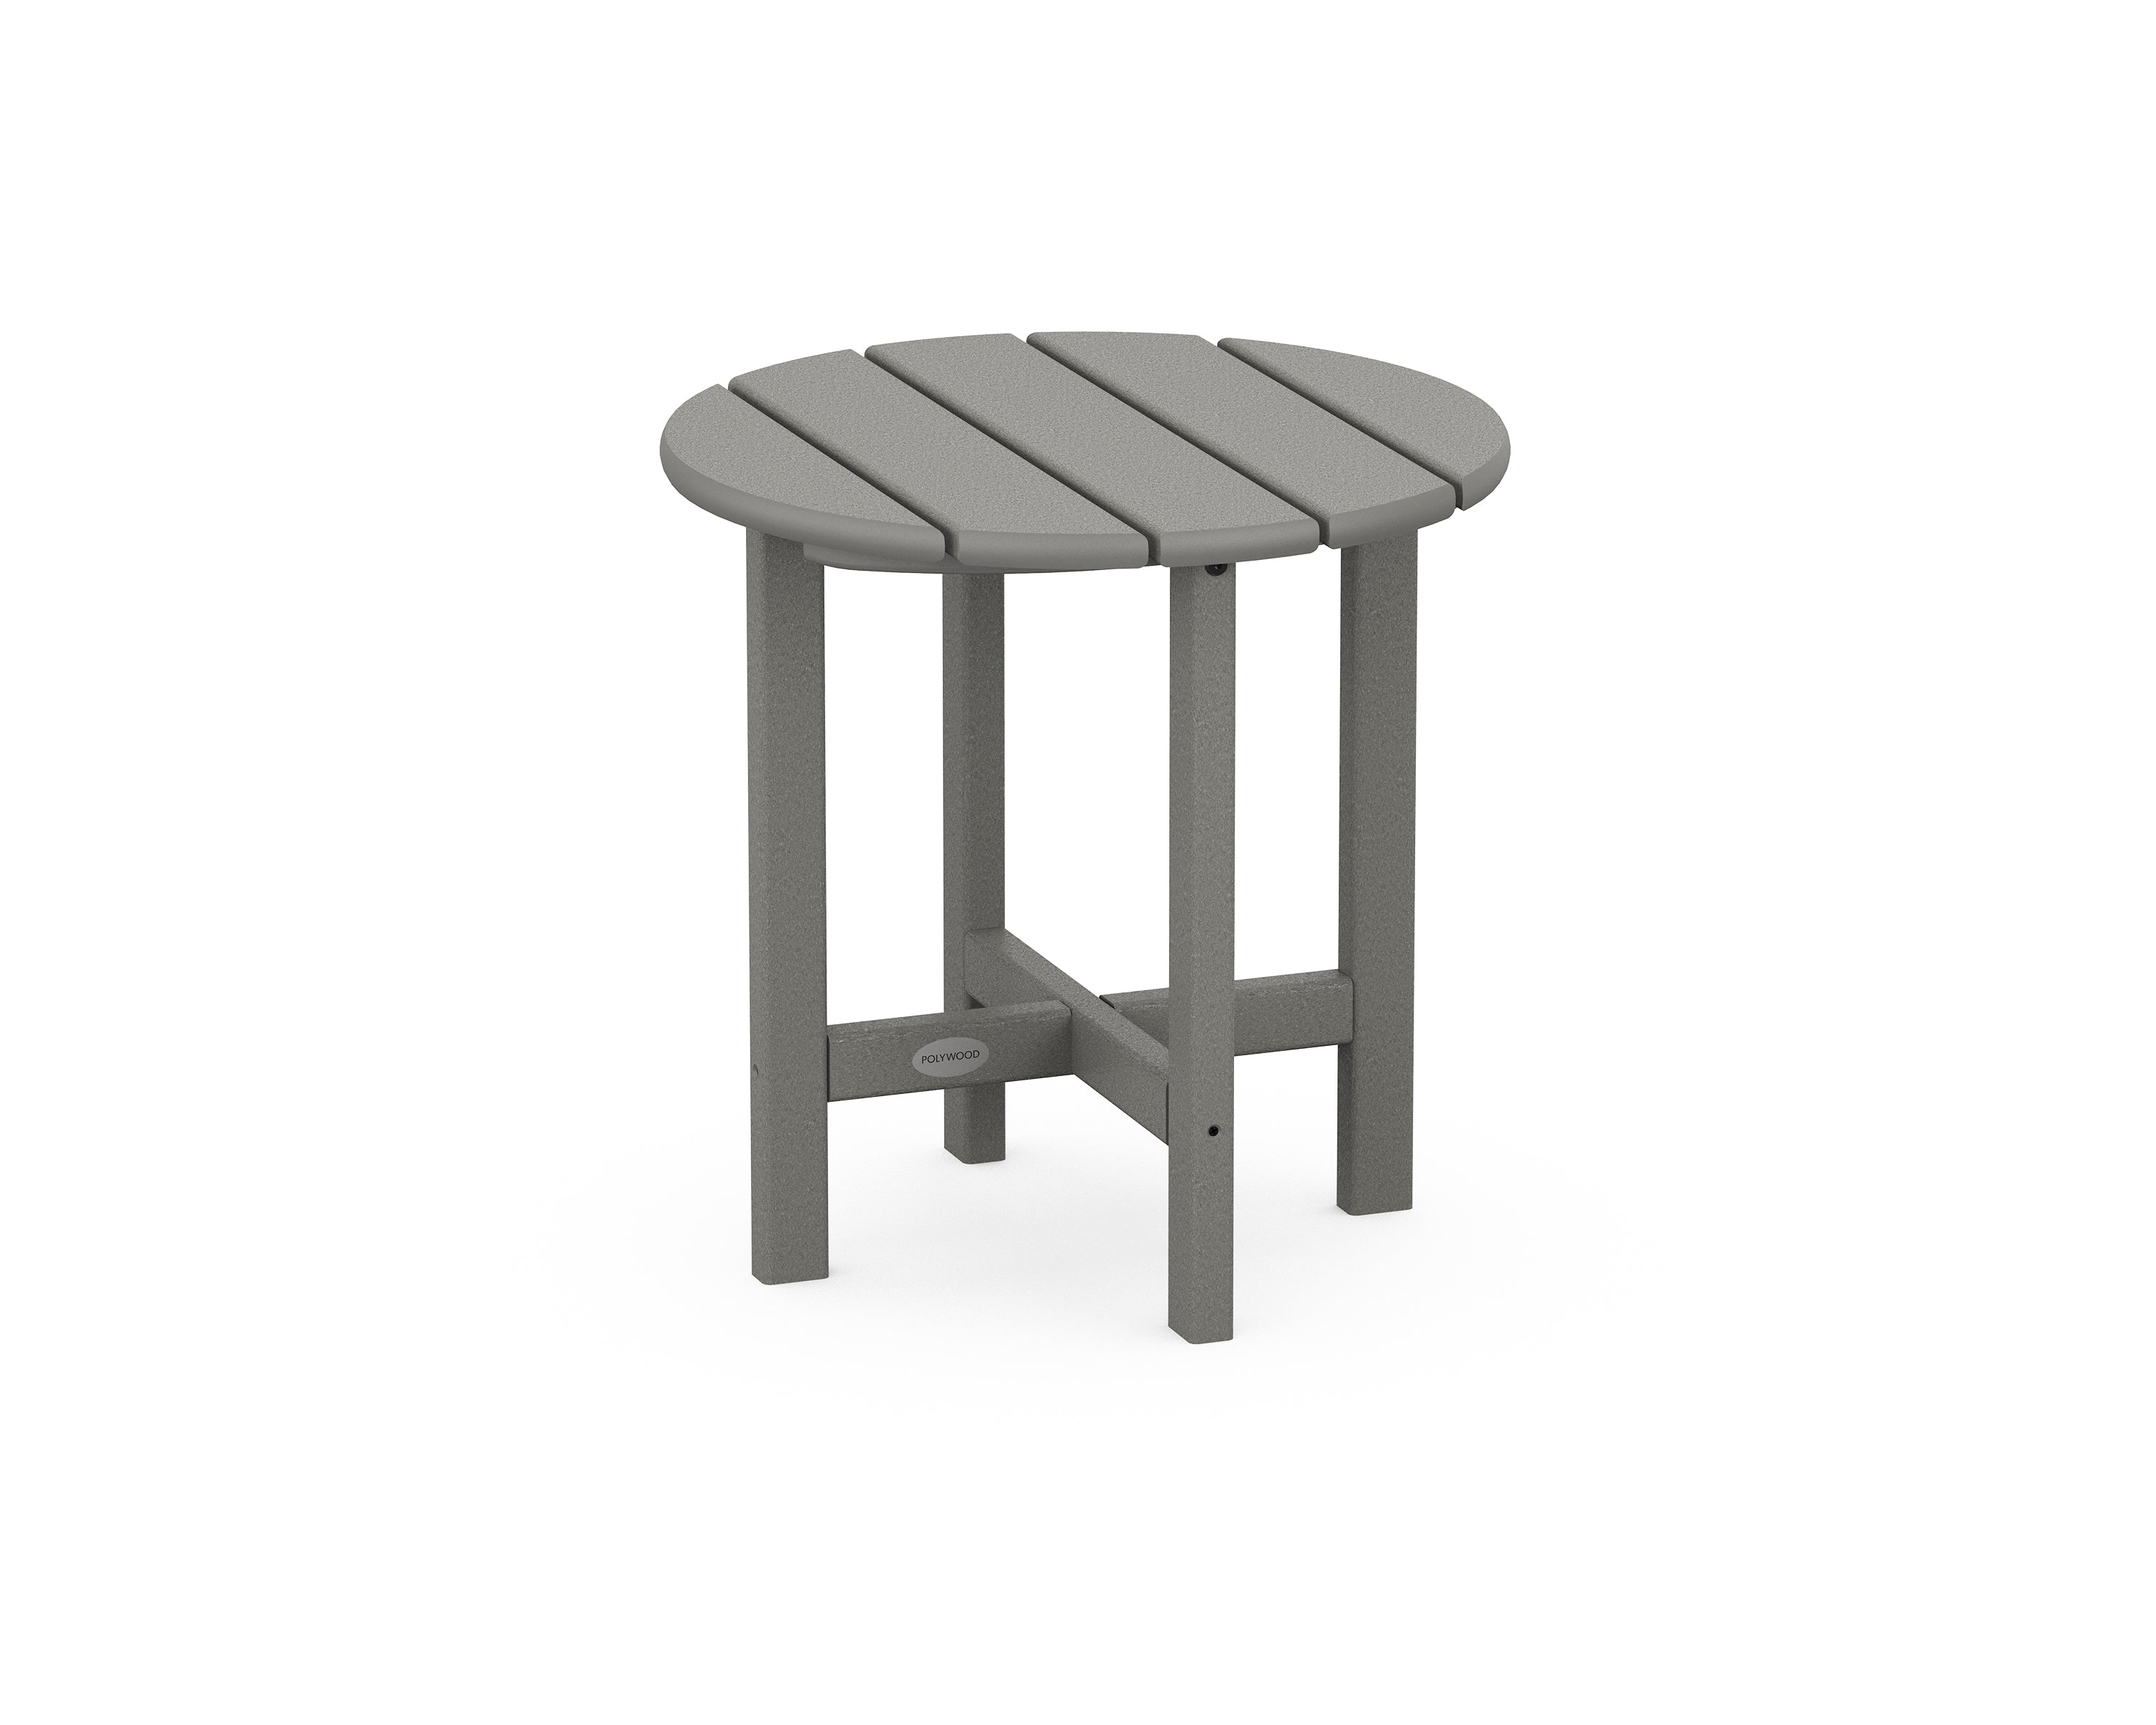 POLYWOOD Round 18 inch Side Table Outdoor Tables Slate Grey 12031458